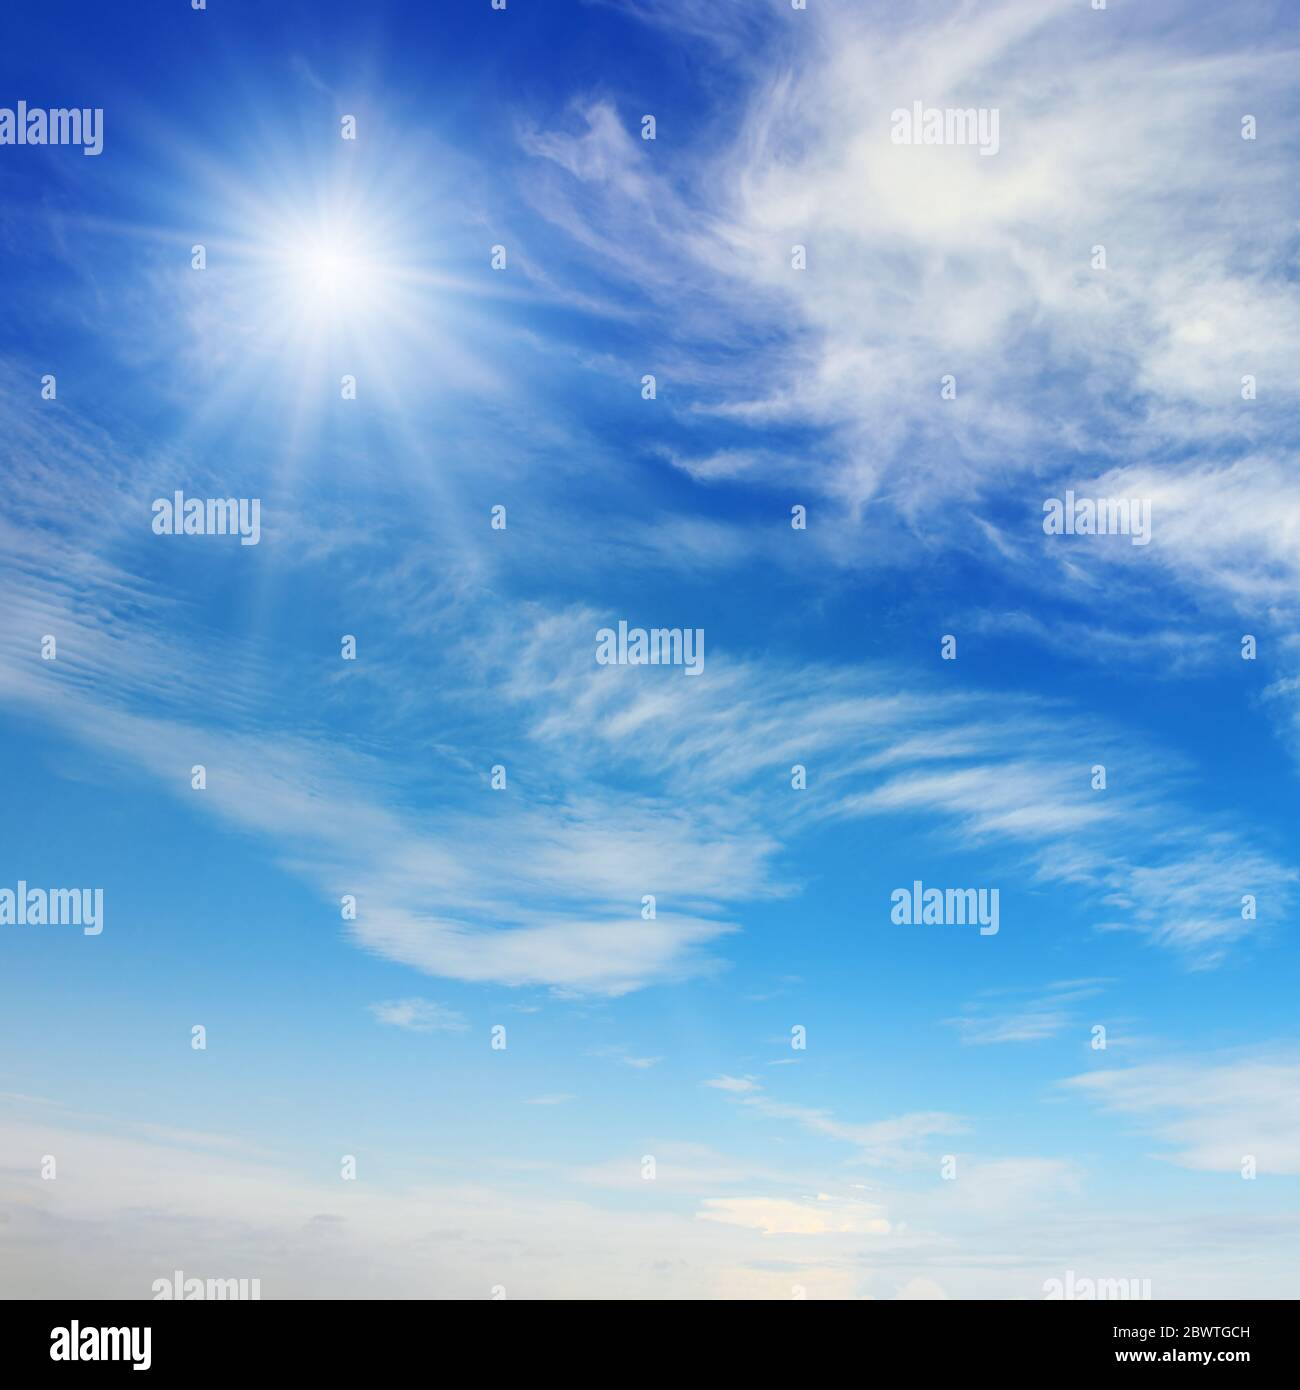 Bright sun on blue sky with beautiful white clouds Stock Photo